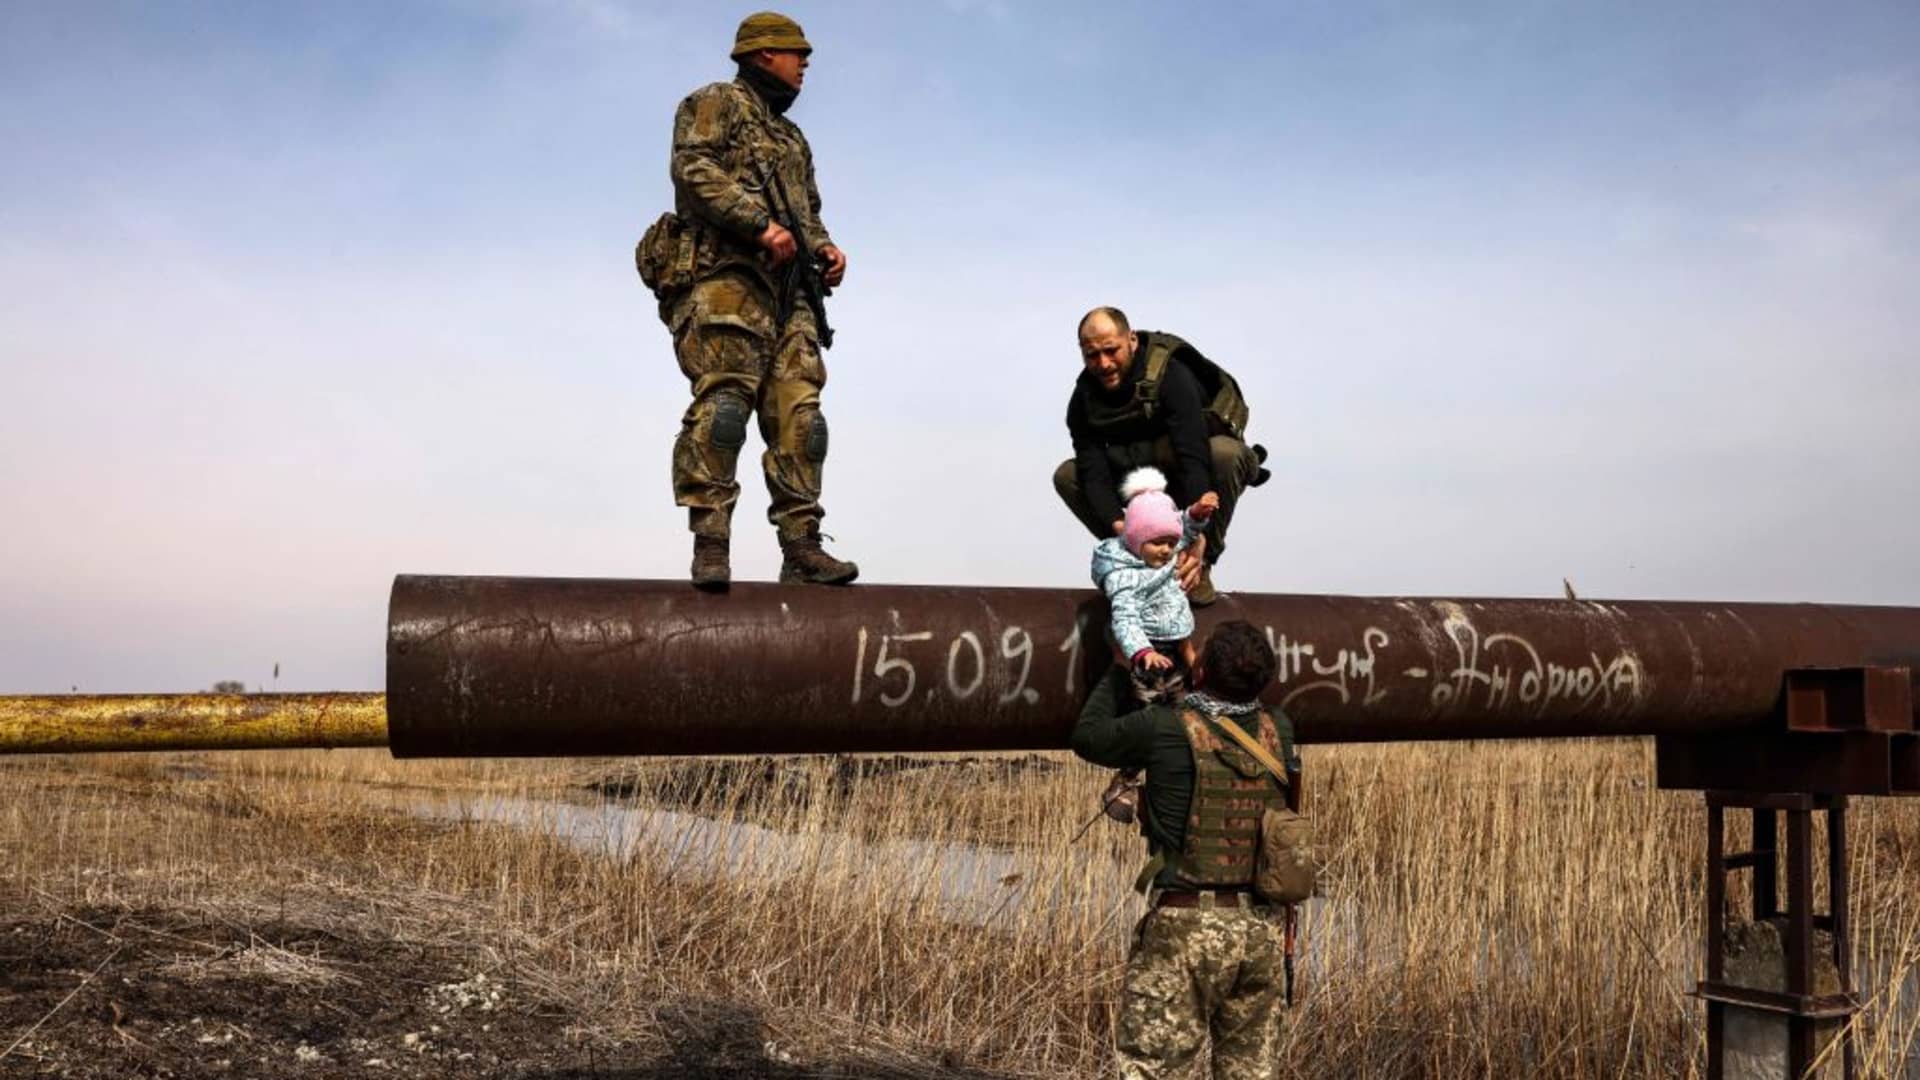 Ukrainian displaced Karina Tkachenko carries her baby after he was helped by Ukrainian servicemen to cross a river, on the outskirts of Kyiv, on March 31, 2022. - Russian forces are repositioning in Ukraine to strengthen their offensive on the Donbass, Nato said March 31, 2022, on the 36th day of the Russian-Ukrainian conflict, as shelling continues in Kharkiv (north) and Mariupol (south). (Photo by RONALDO SCHEMIDT / AFP) (Photo by RONALDO SCHEMIDT/AFP via Getty Images)